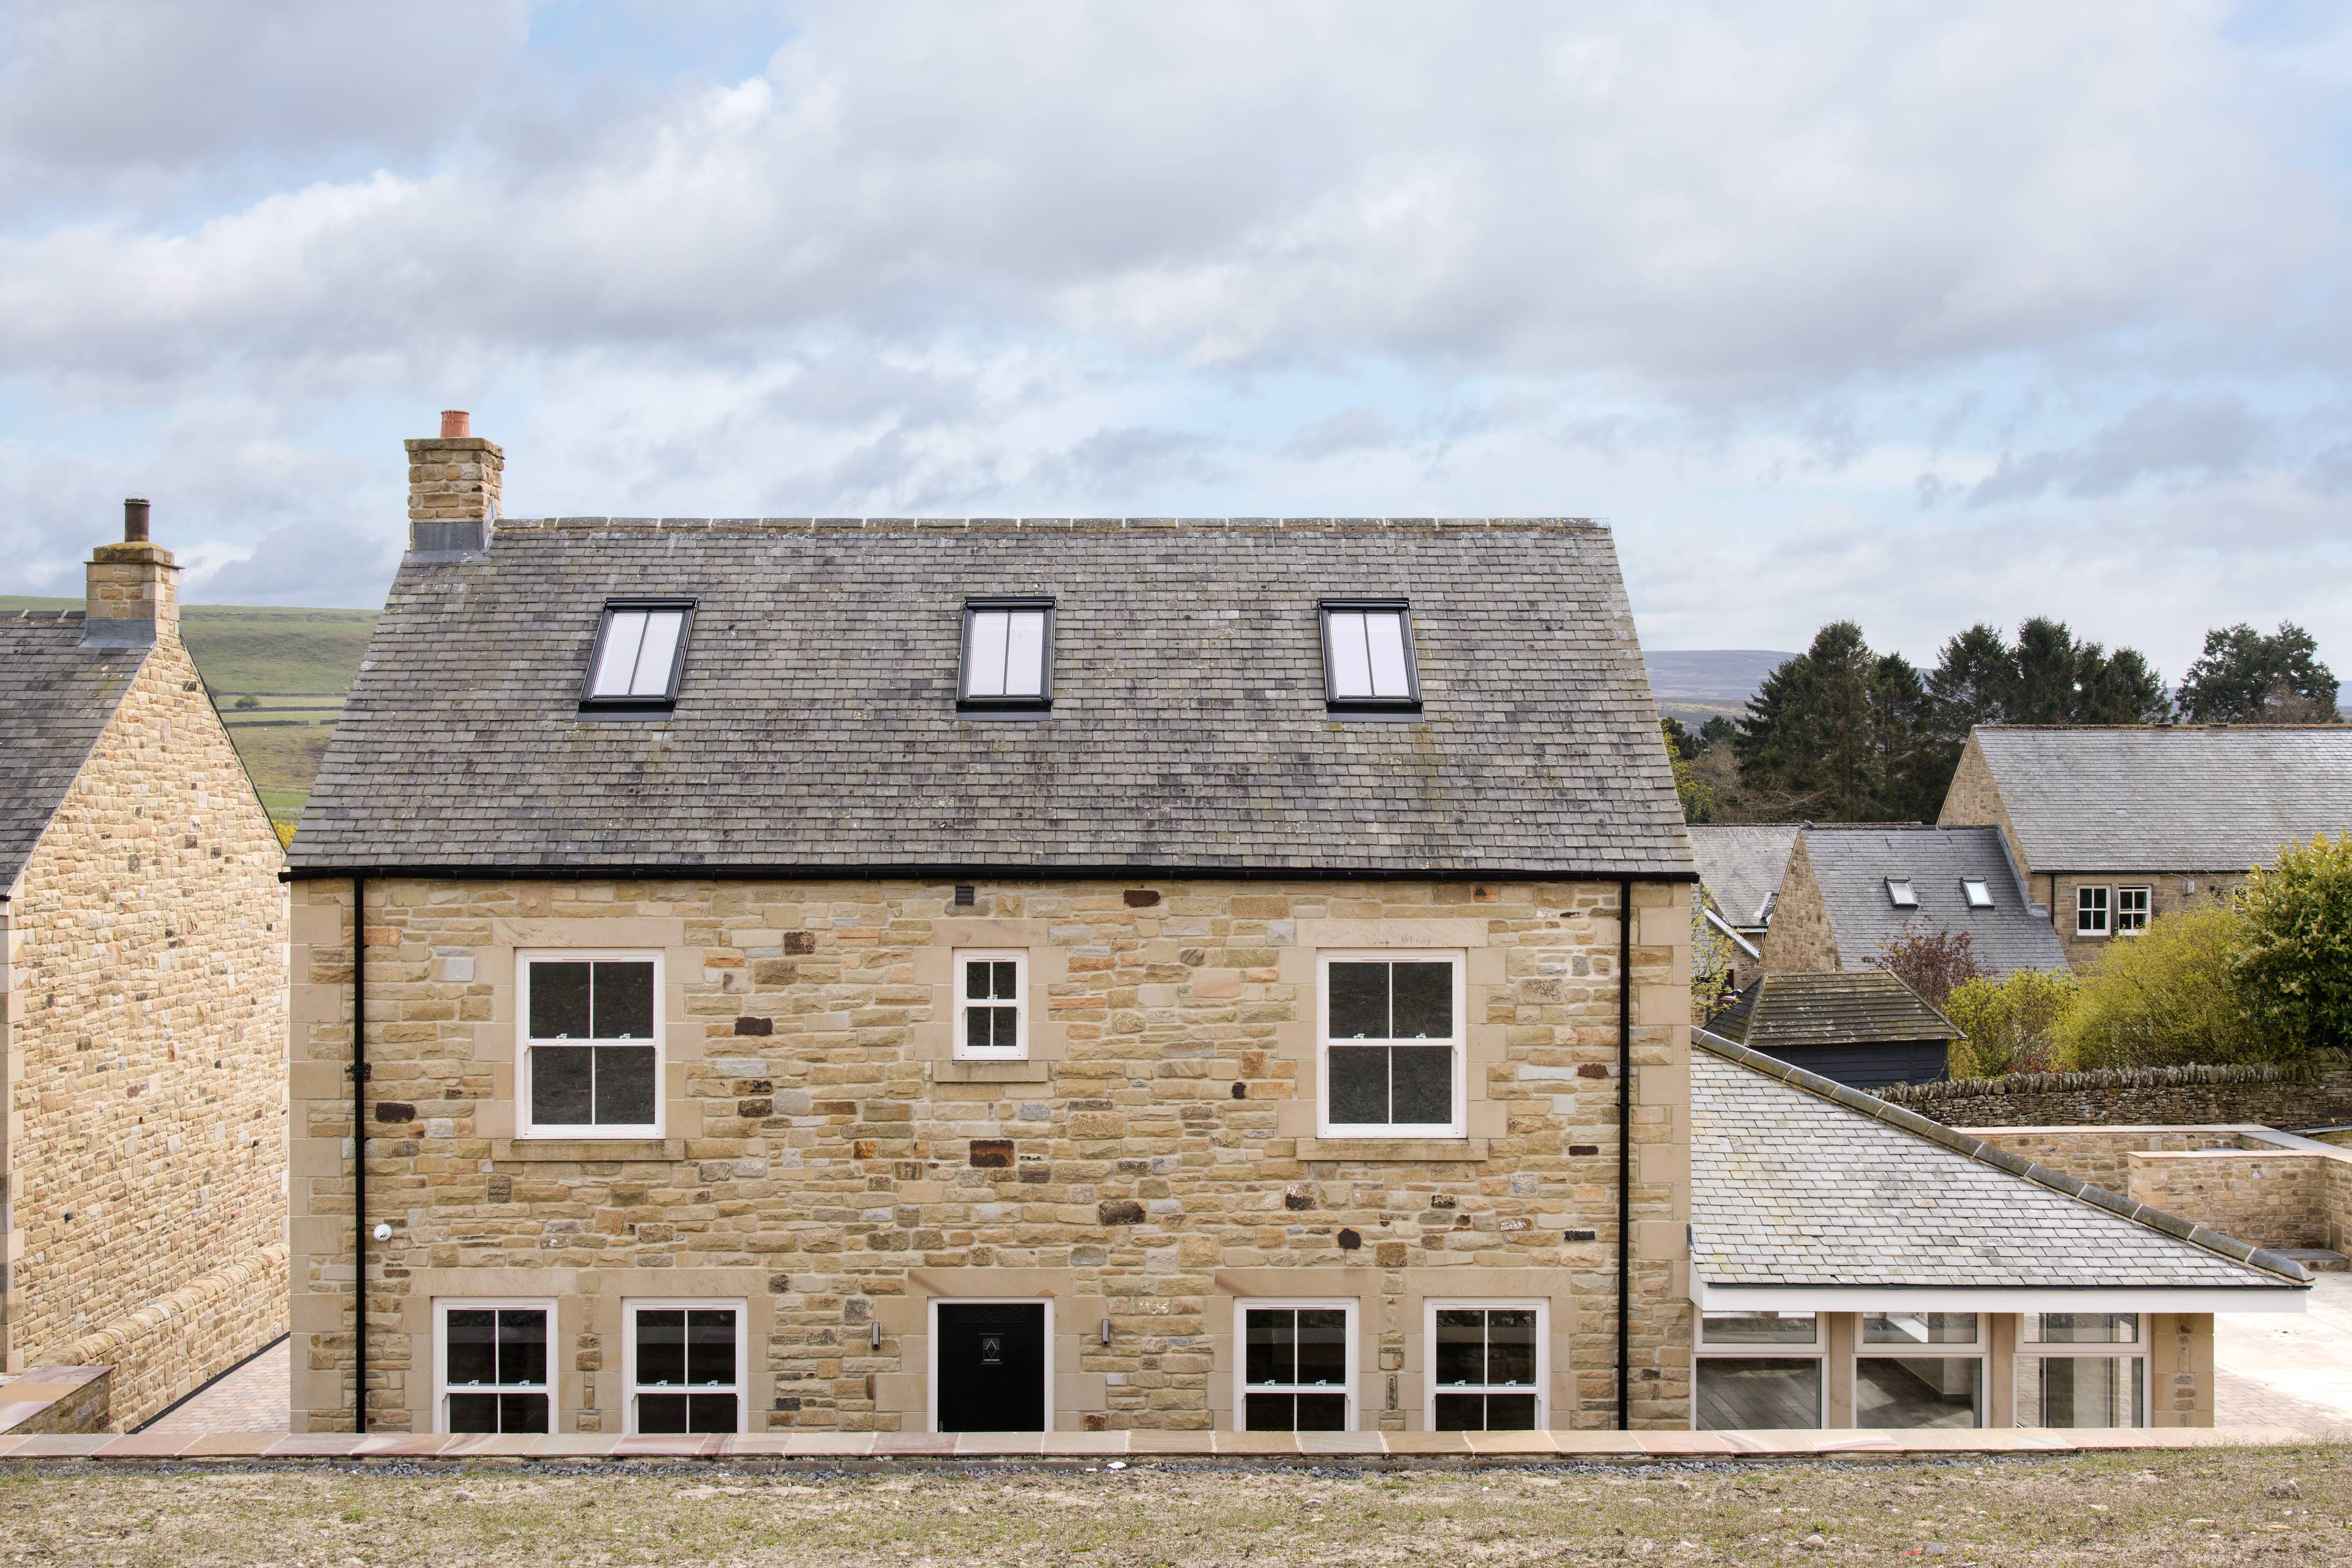 Located 2 miles away from the beloved Derwent Reservoir; this impressive 6-bedroom stone house sits in a sought-after location surrounded by countryside. Close to neighbouring Northumberland, Edmundbyers is a village offering scenic views and quietude.